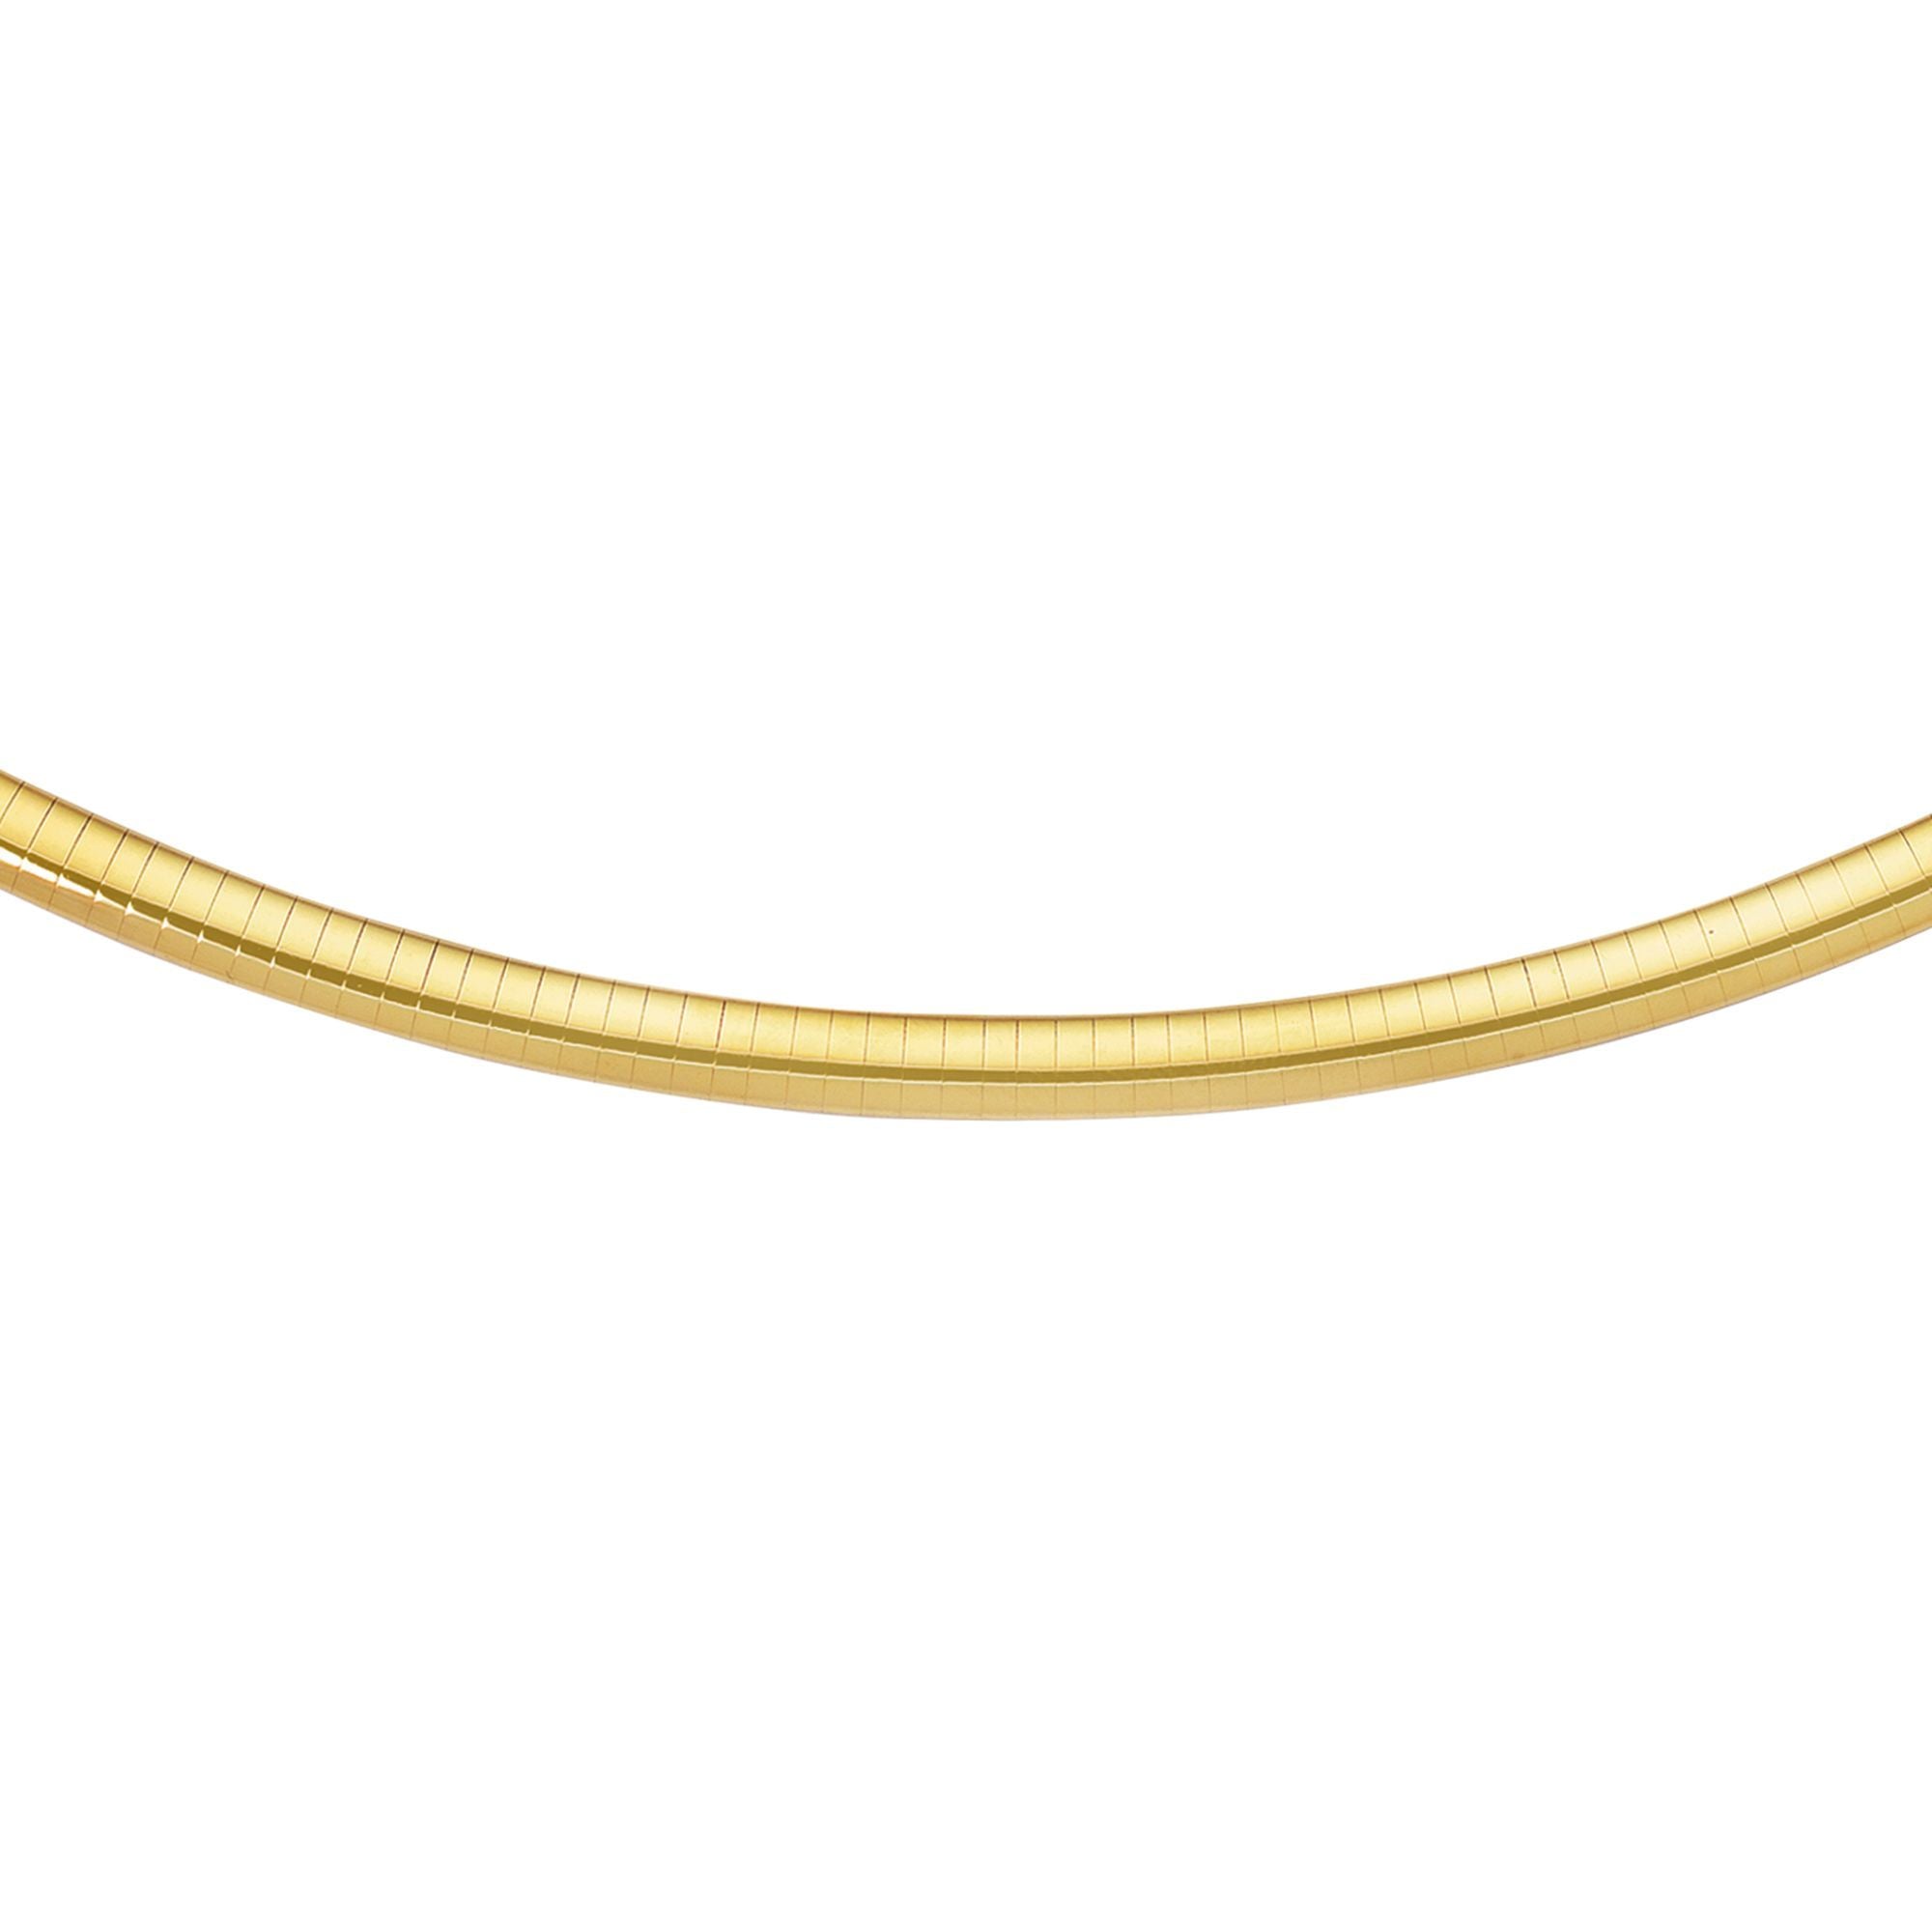 14k Yellow Gold Omega Chain Chocker Necklace, 6mm fine designer jewelry for men and women